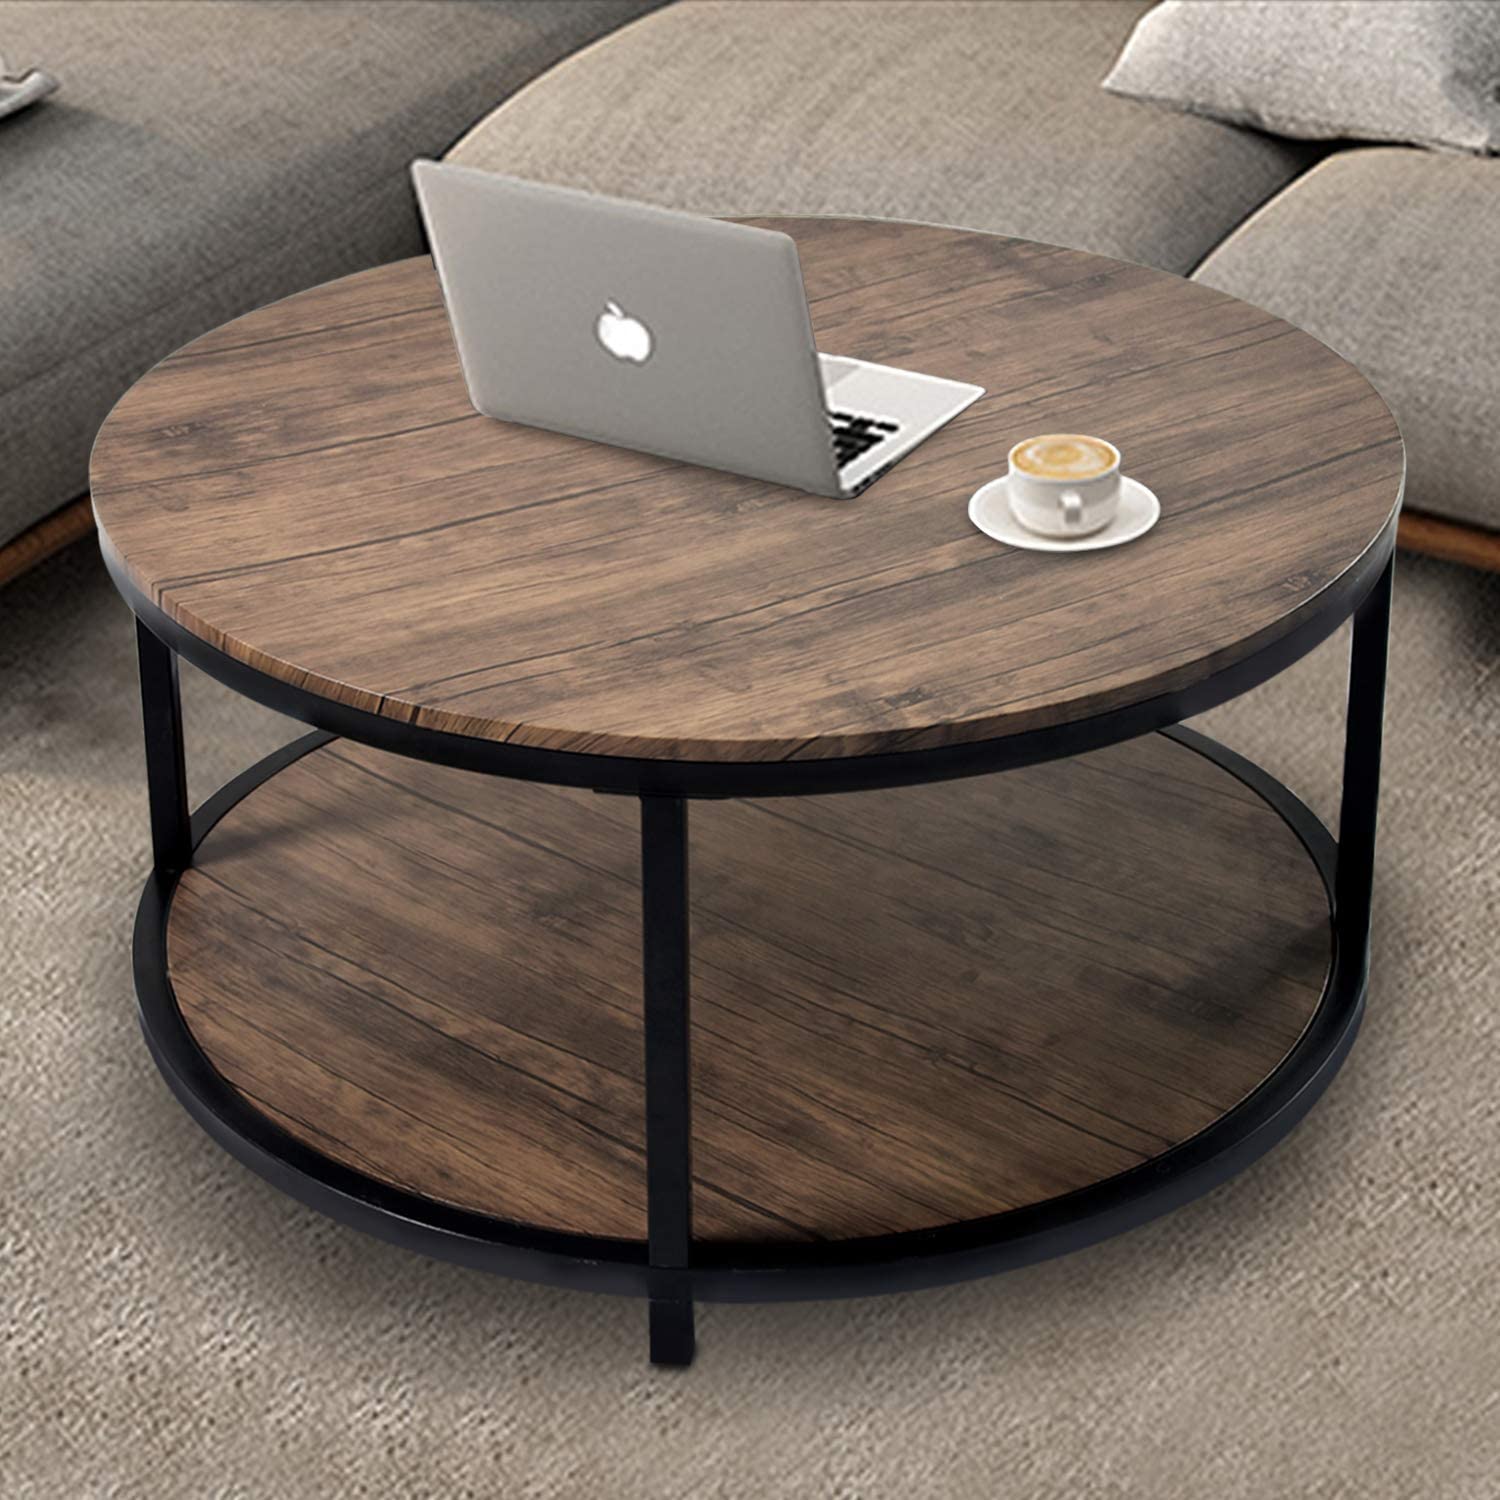 NSdirect Industrial Living Room Coffee Table